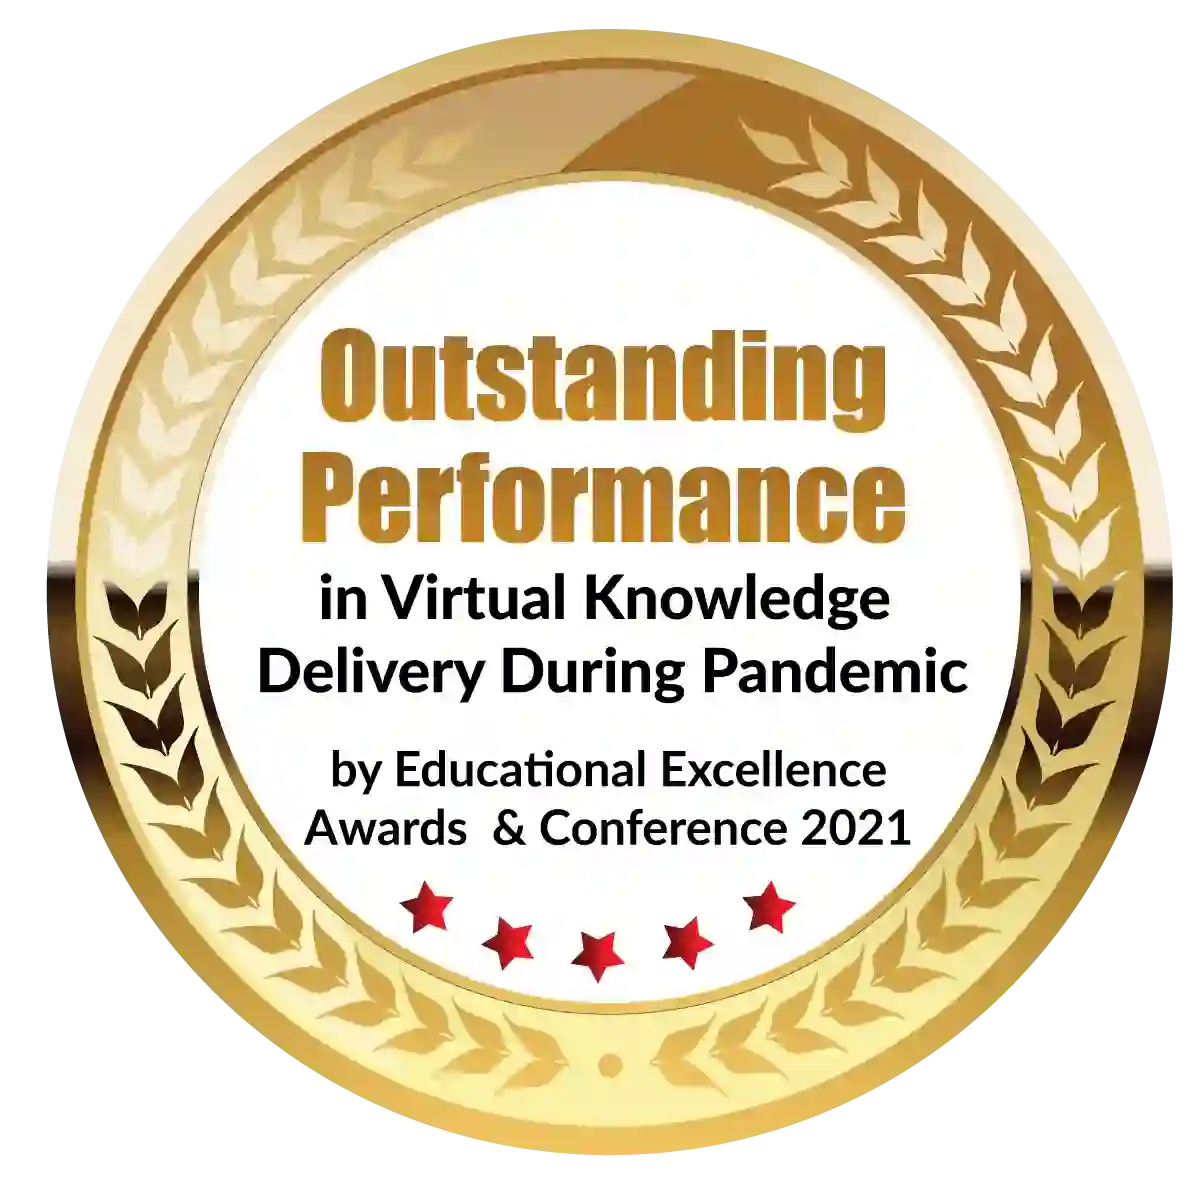 Outstanding Performance in Virtual Knowledge Delivery During Pandemic
                                                                           <small>by Educational Excellence Awards & Conference 2021